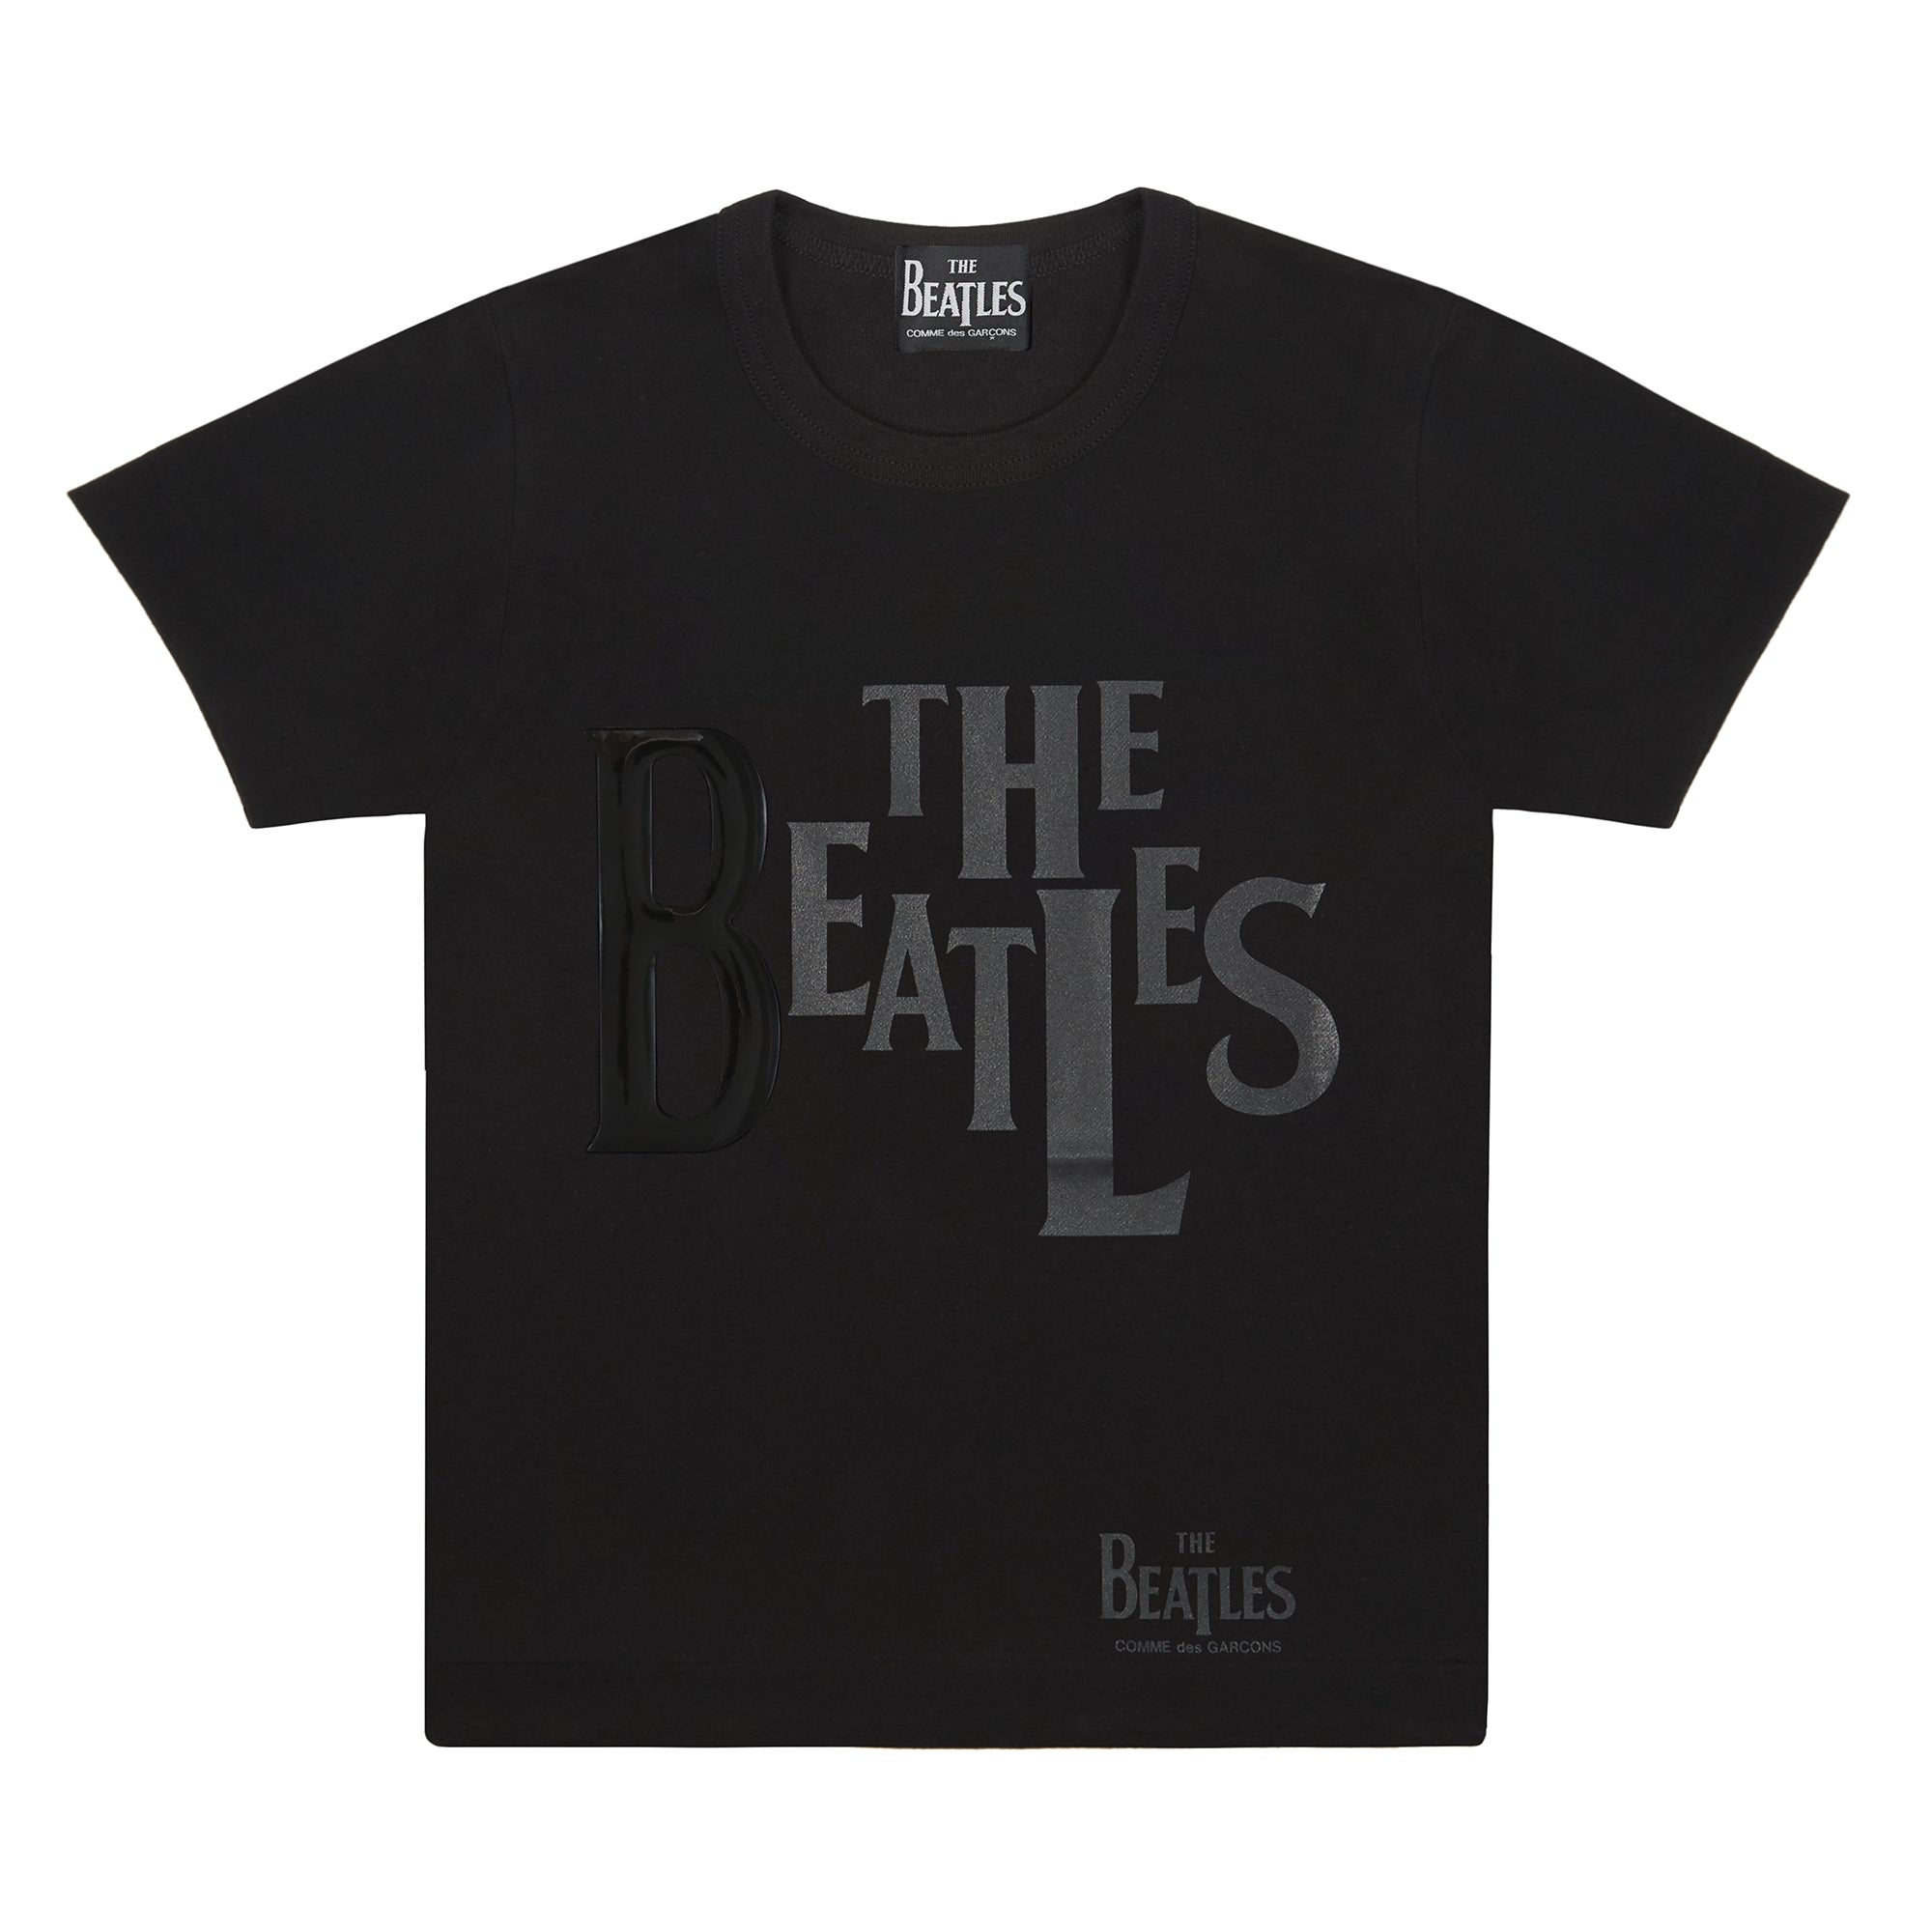 The Beatles CDG - Rubber Printed T-Shirt Black - (VT-T002-051) view 1